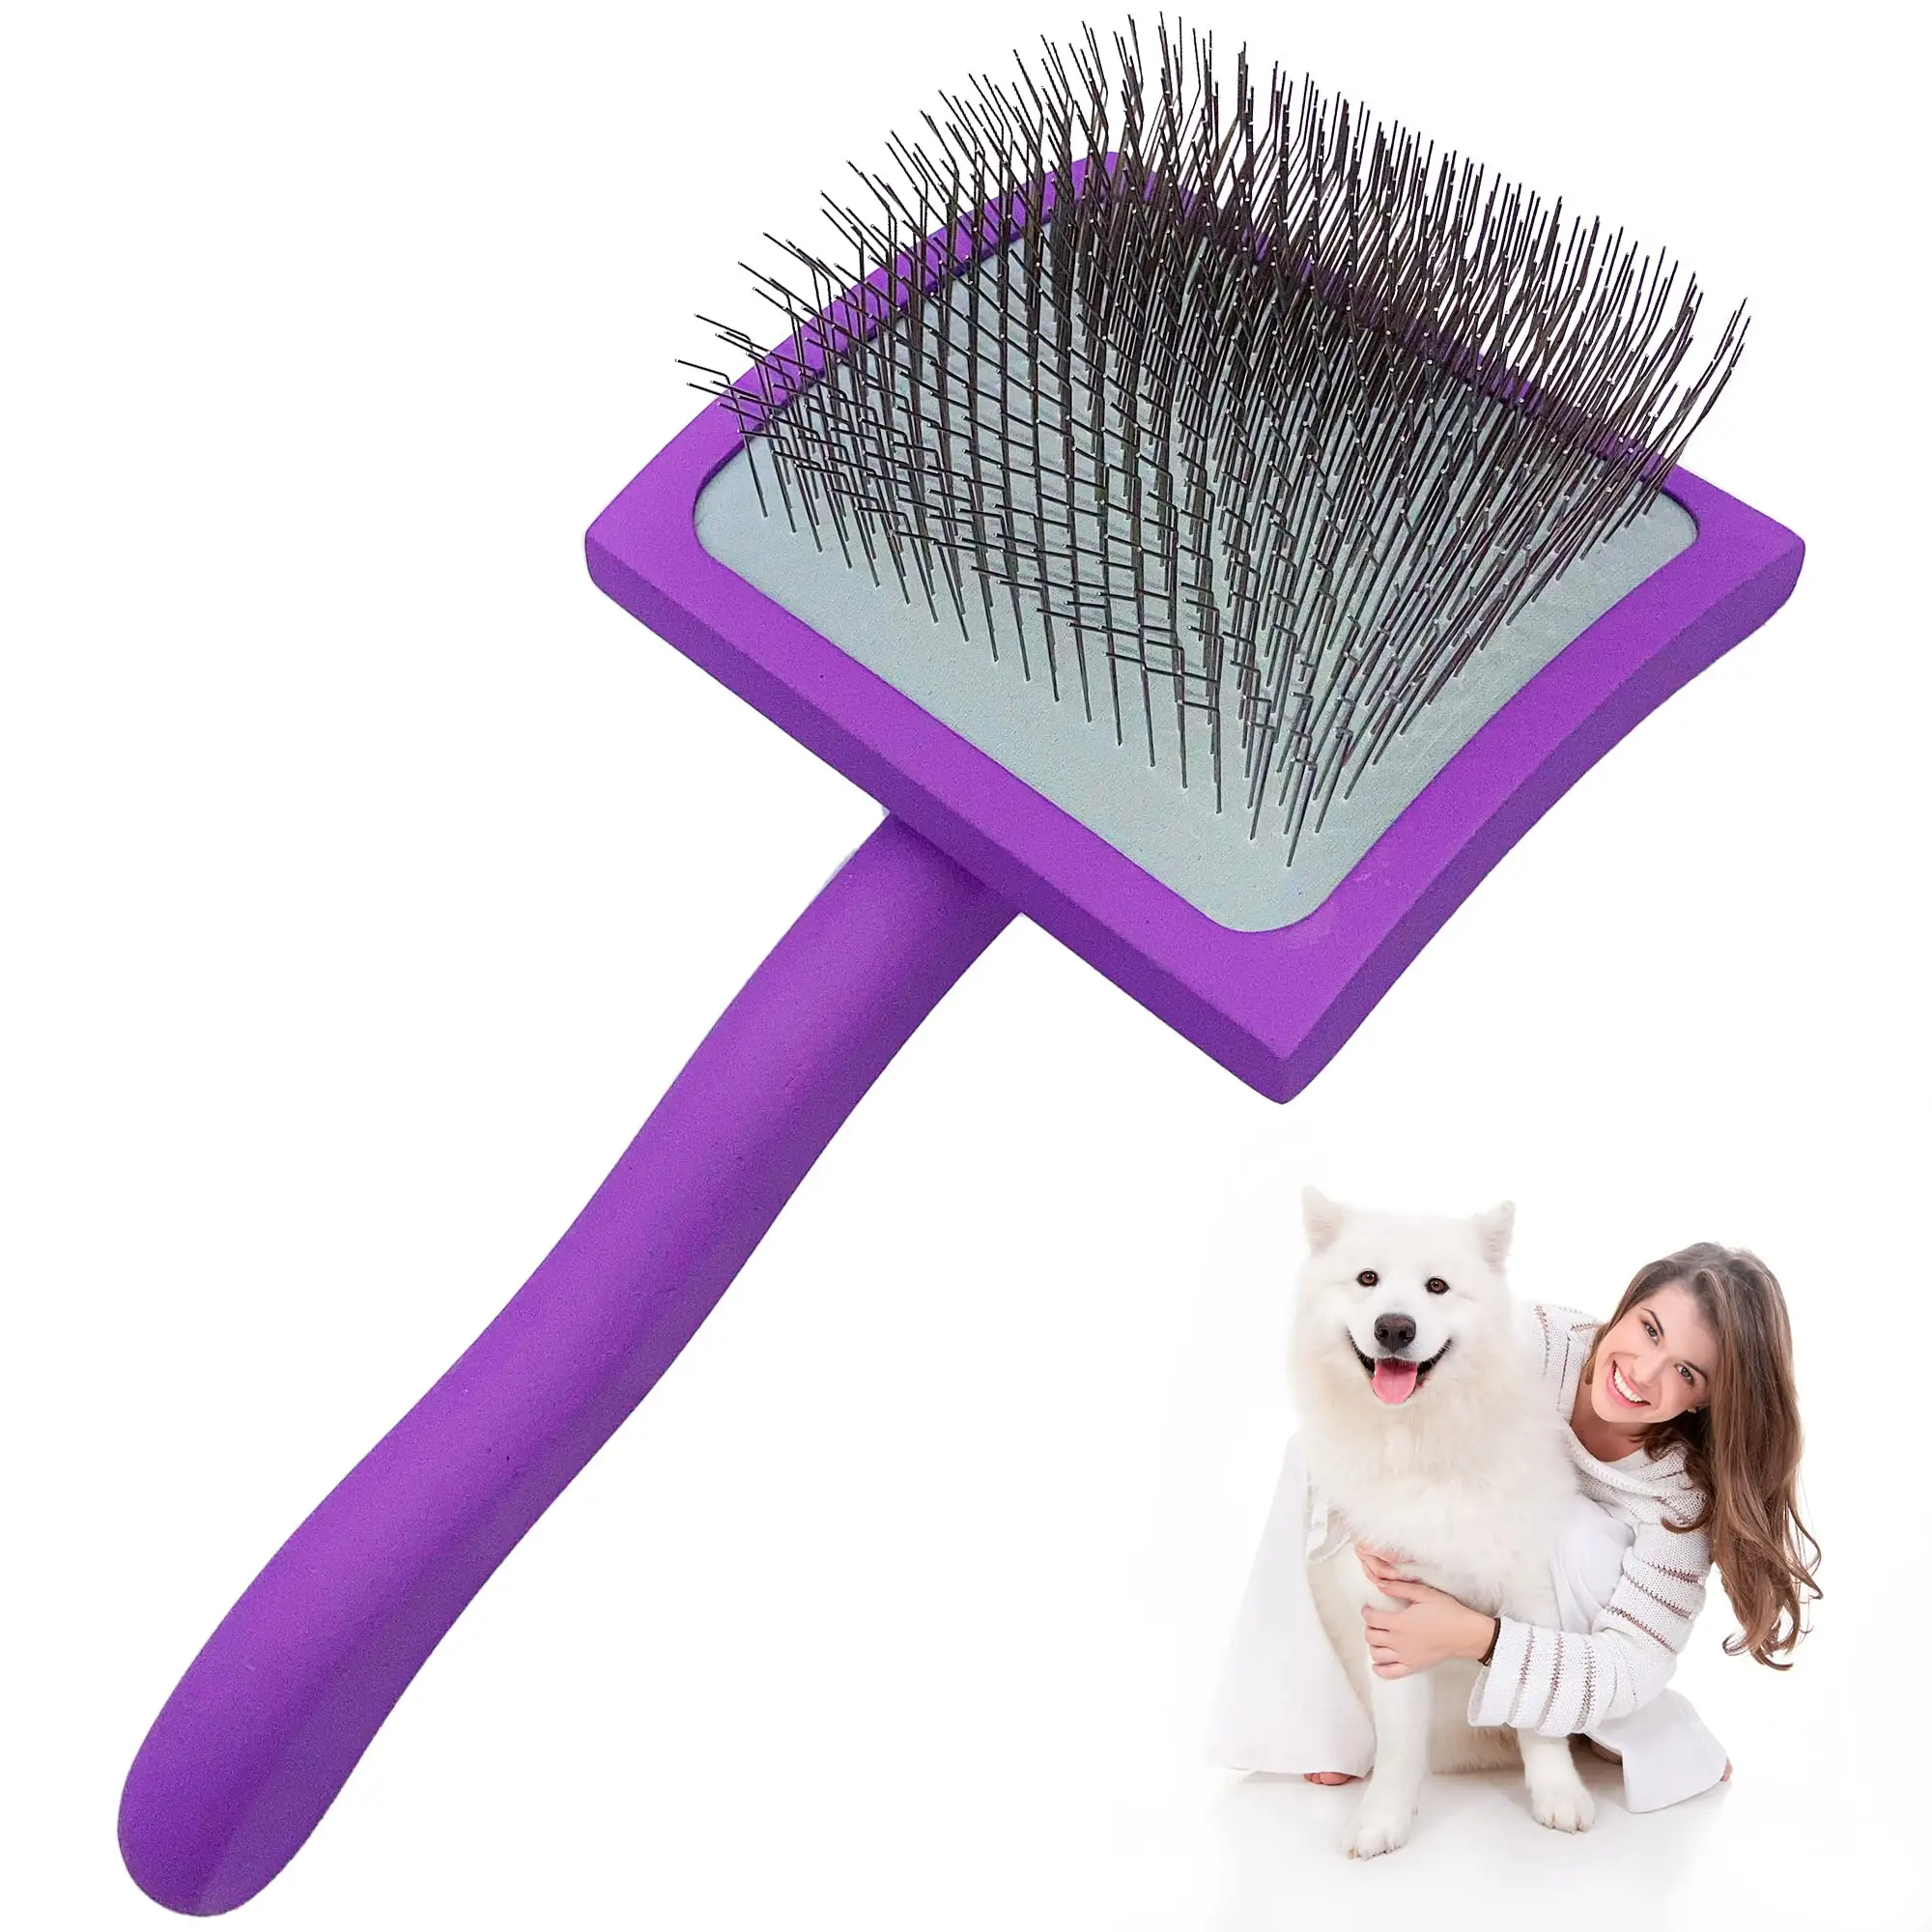 Petdom Wooden Handle Pet Wire Grooming Brush Self-cleaning Long Pin Slicker Brush for Dogs and Cats Dog Comb Stainless Steel